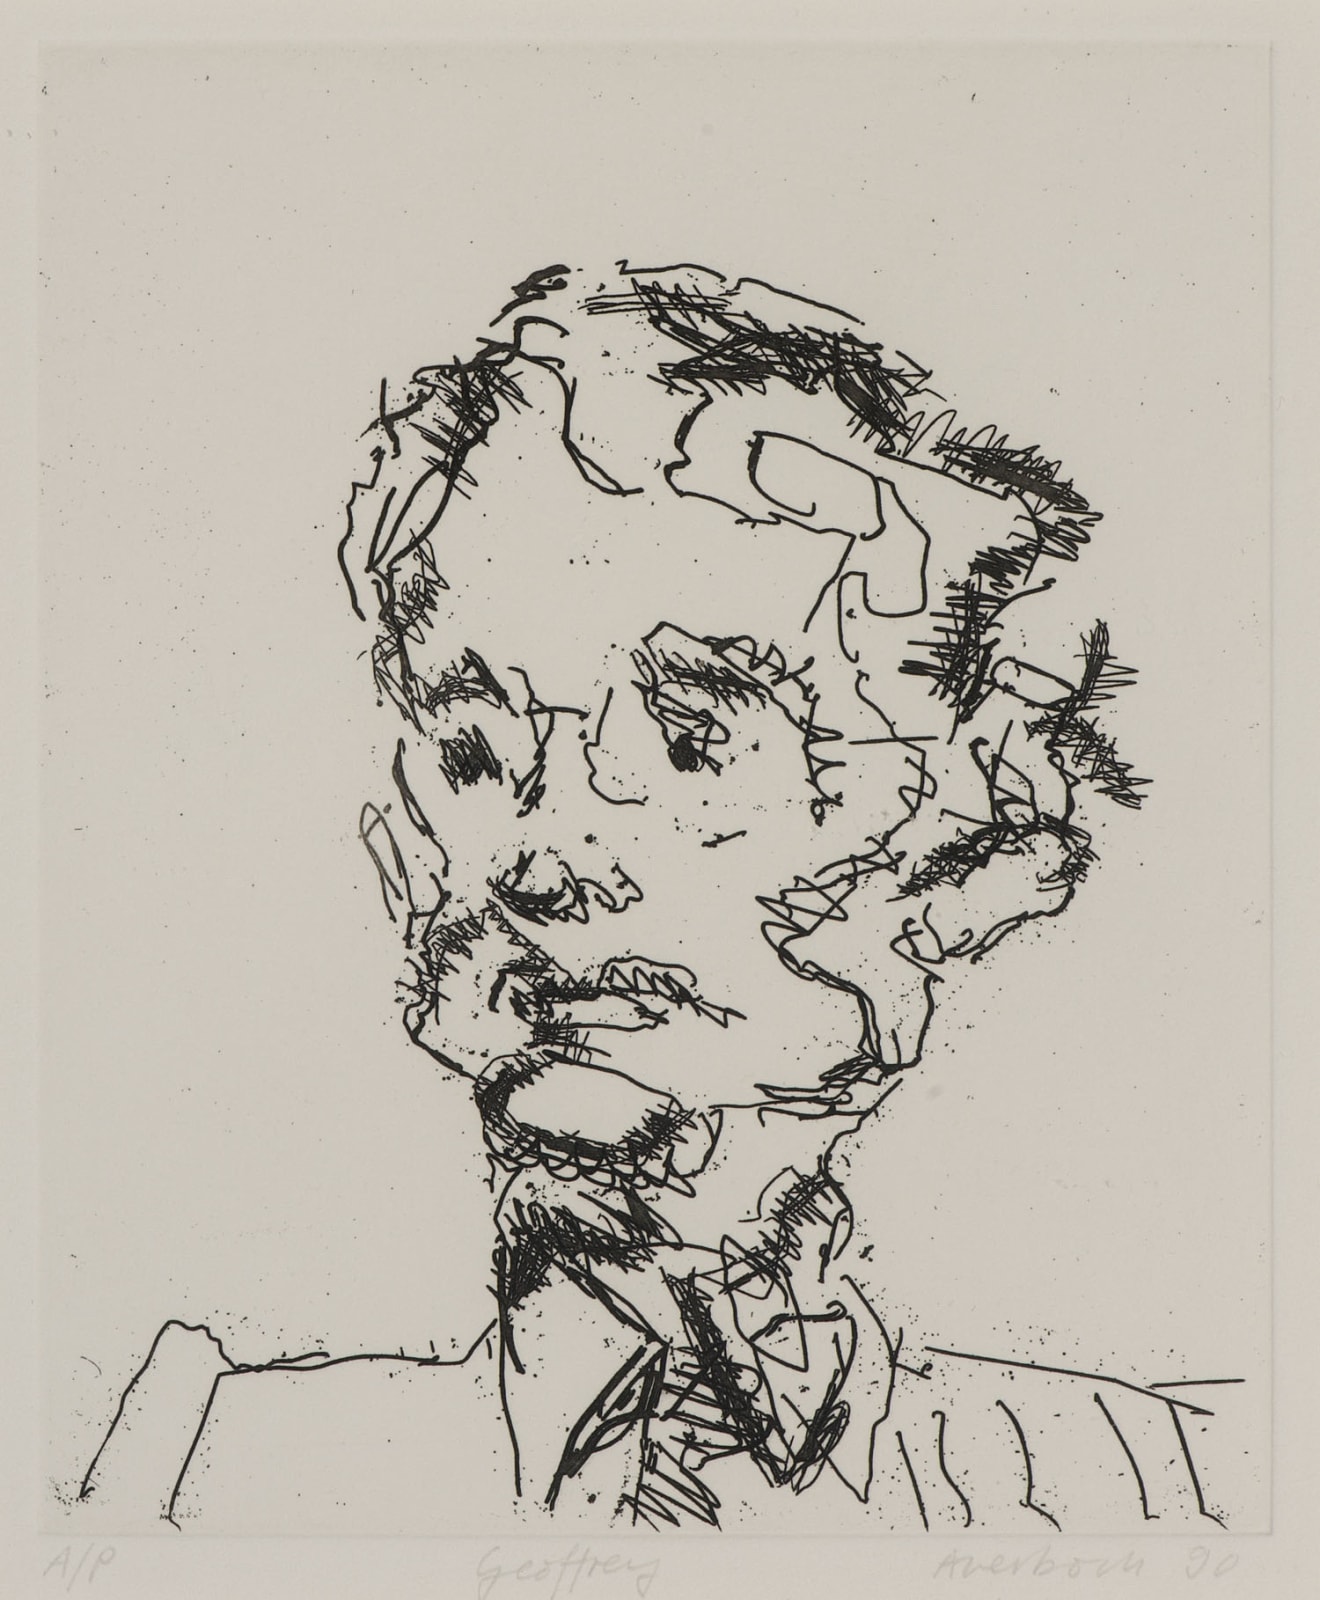 Frank Auerbach (1931-) Geoffrey, Series: Part of Seven Portraits 1990 Etching, printed on Somerset white paper, artist's proof outside the published edition of 50 19.5 x 16.5 cm Ben Uri Collection © Frank Auerbach, courtesy Marlborough Fine Art